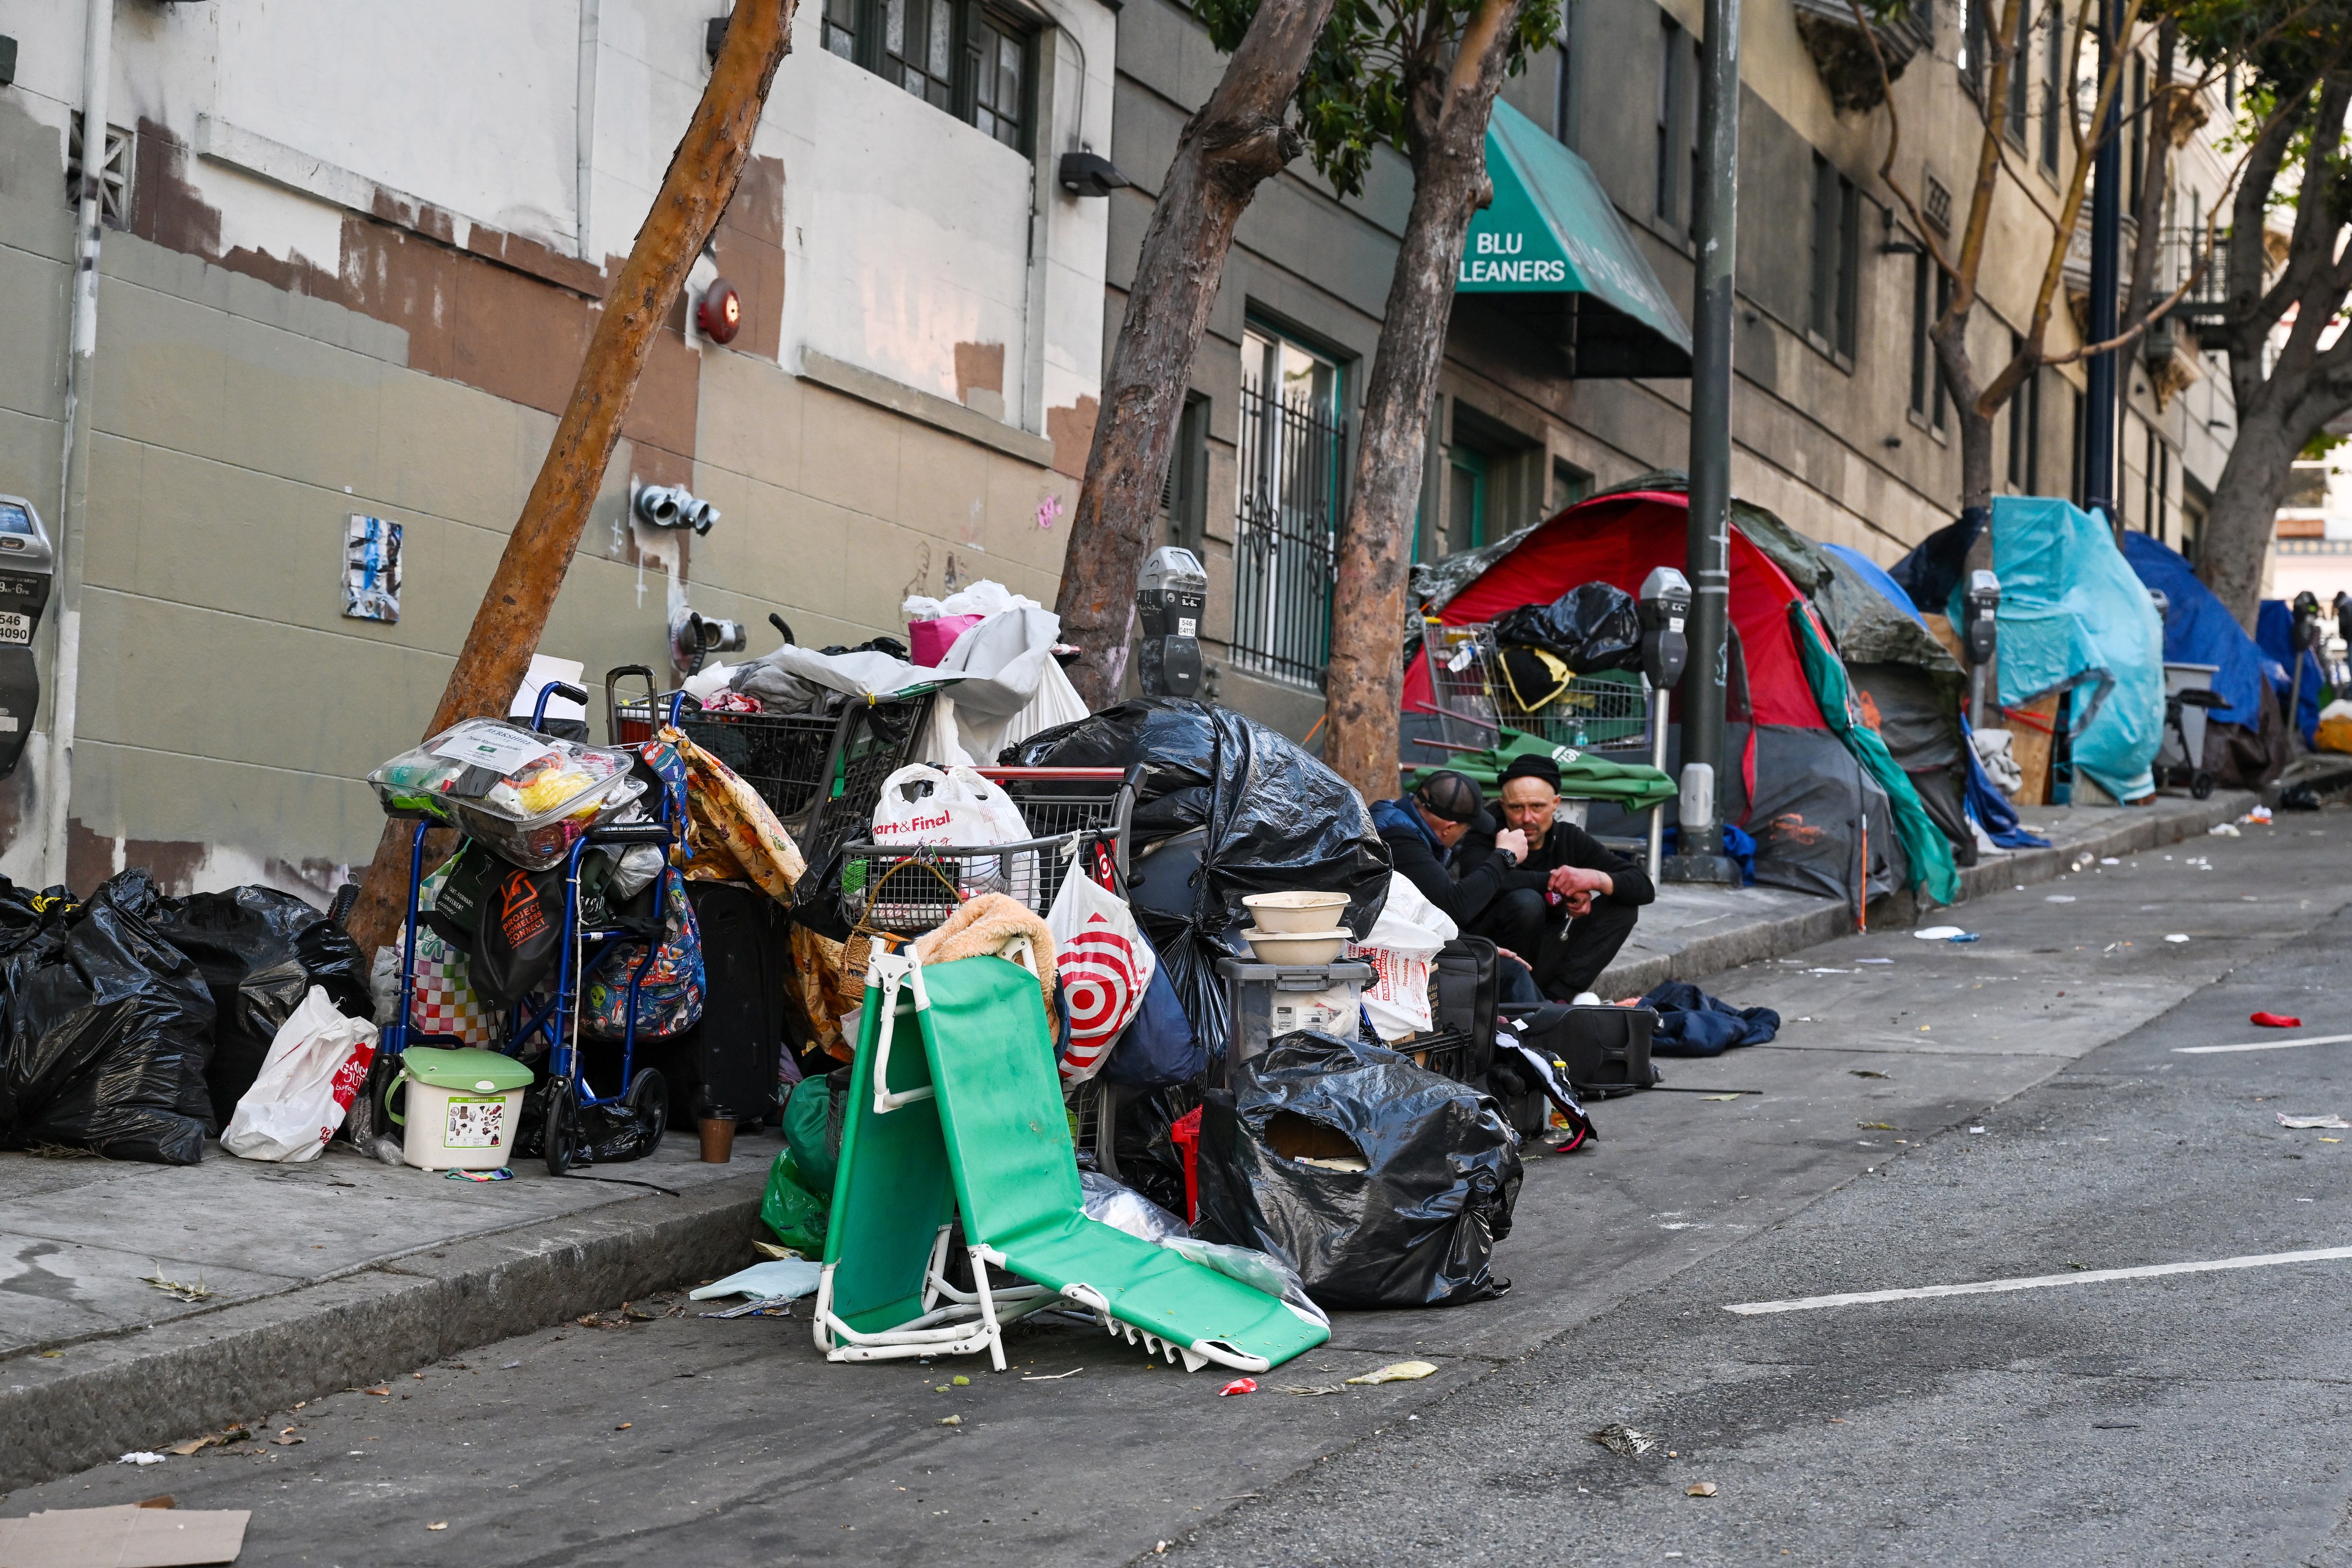 A collection of personal belongings and tents line a city street.